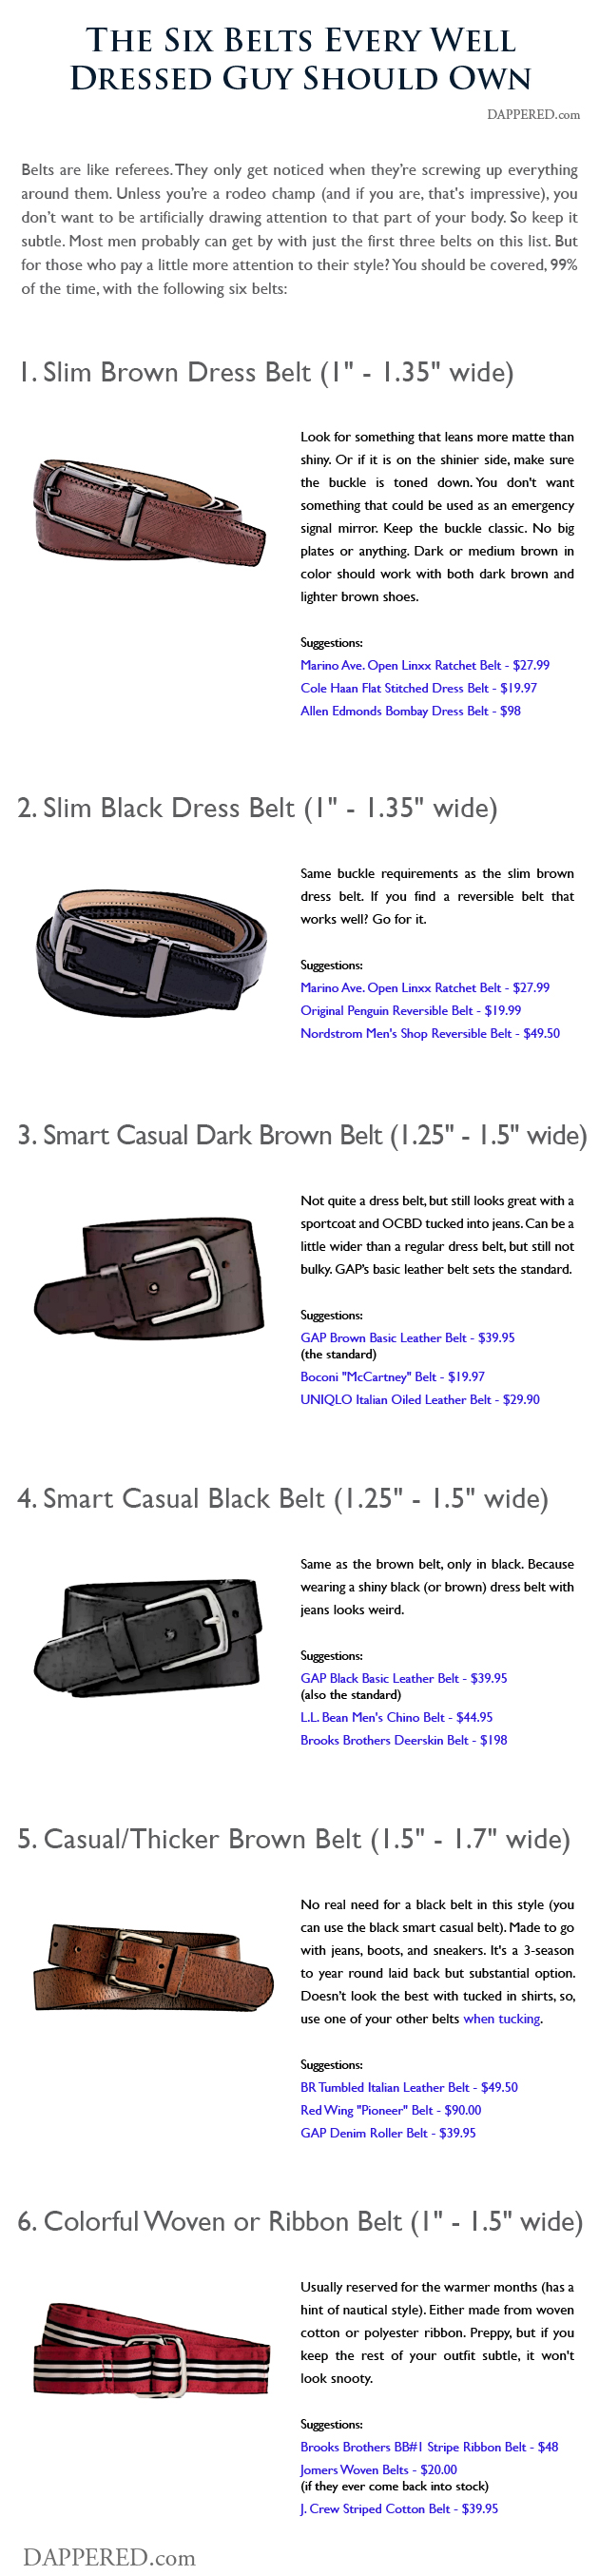 The 6 Belts Every Well Dressed Guy Needs | Dappered.com